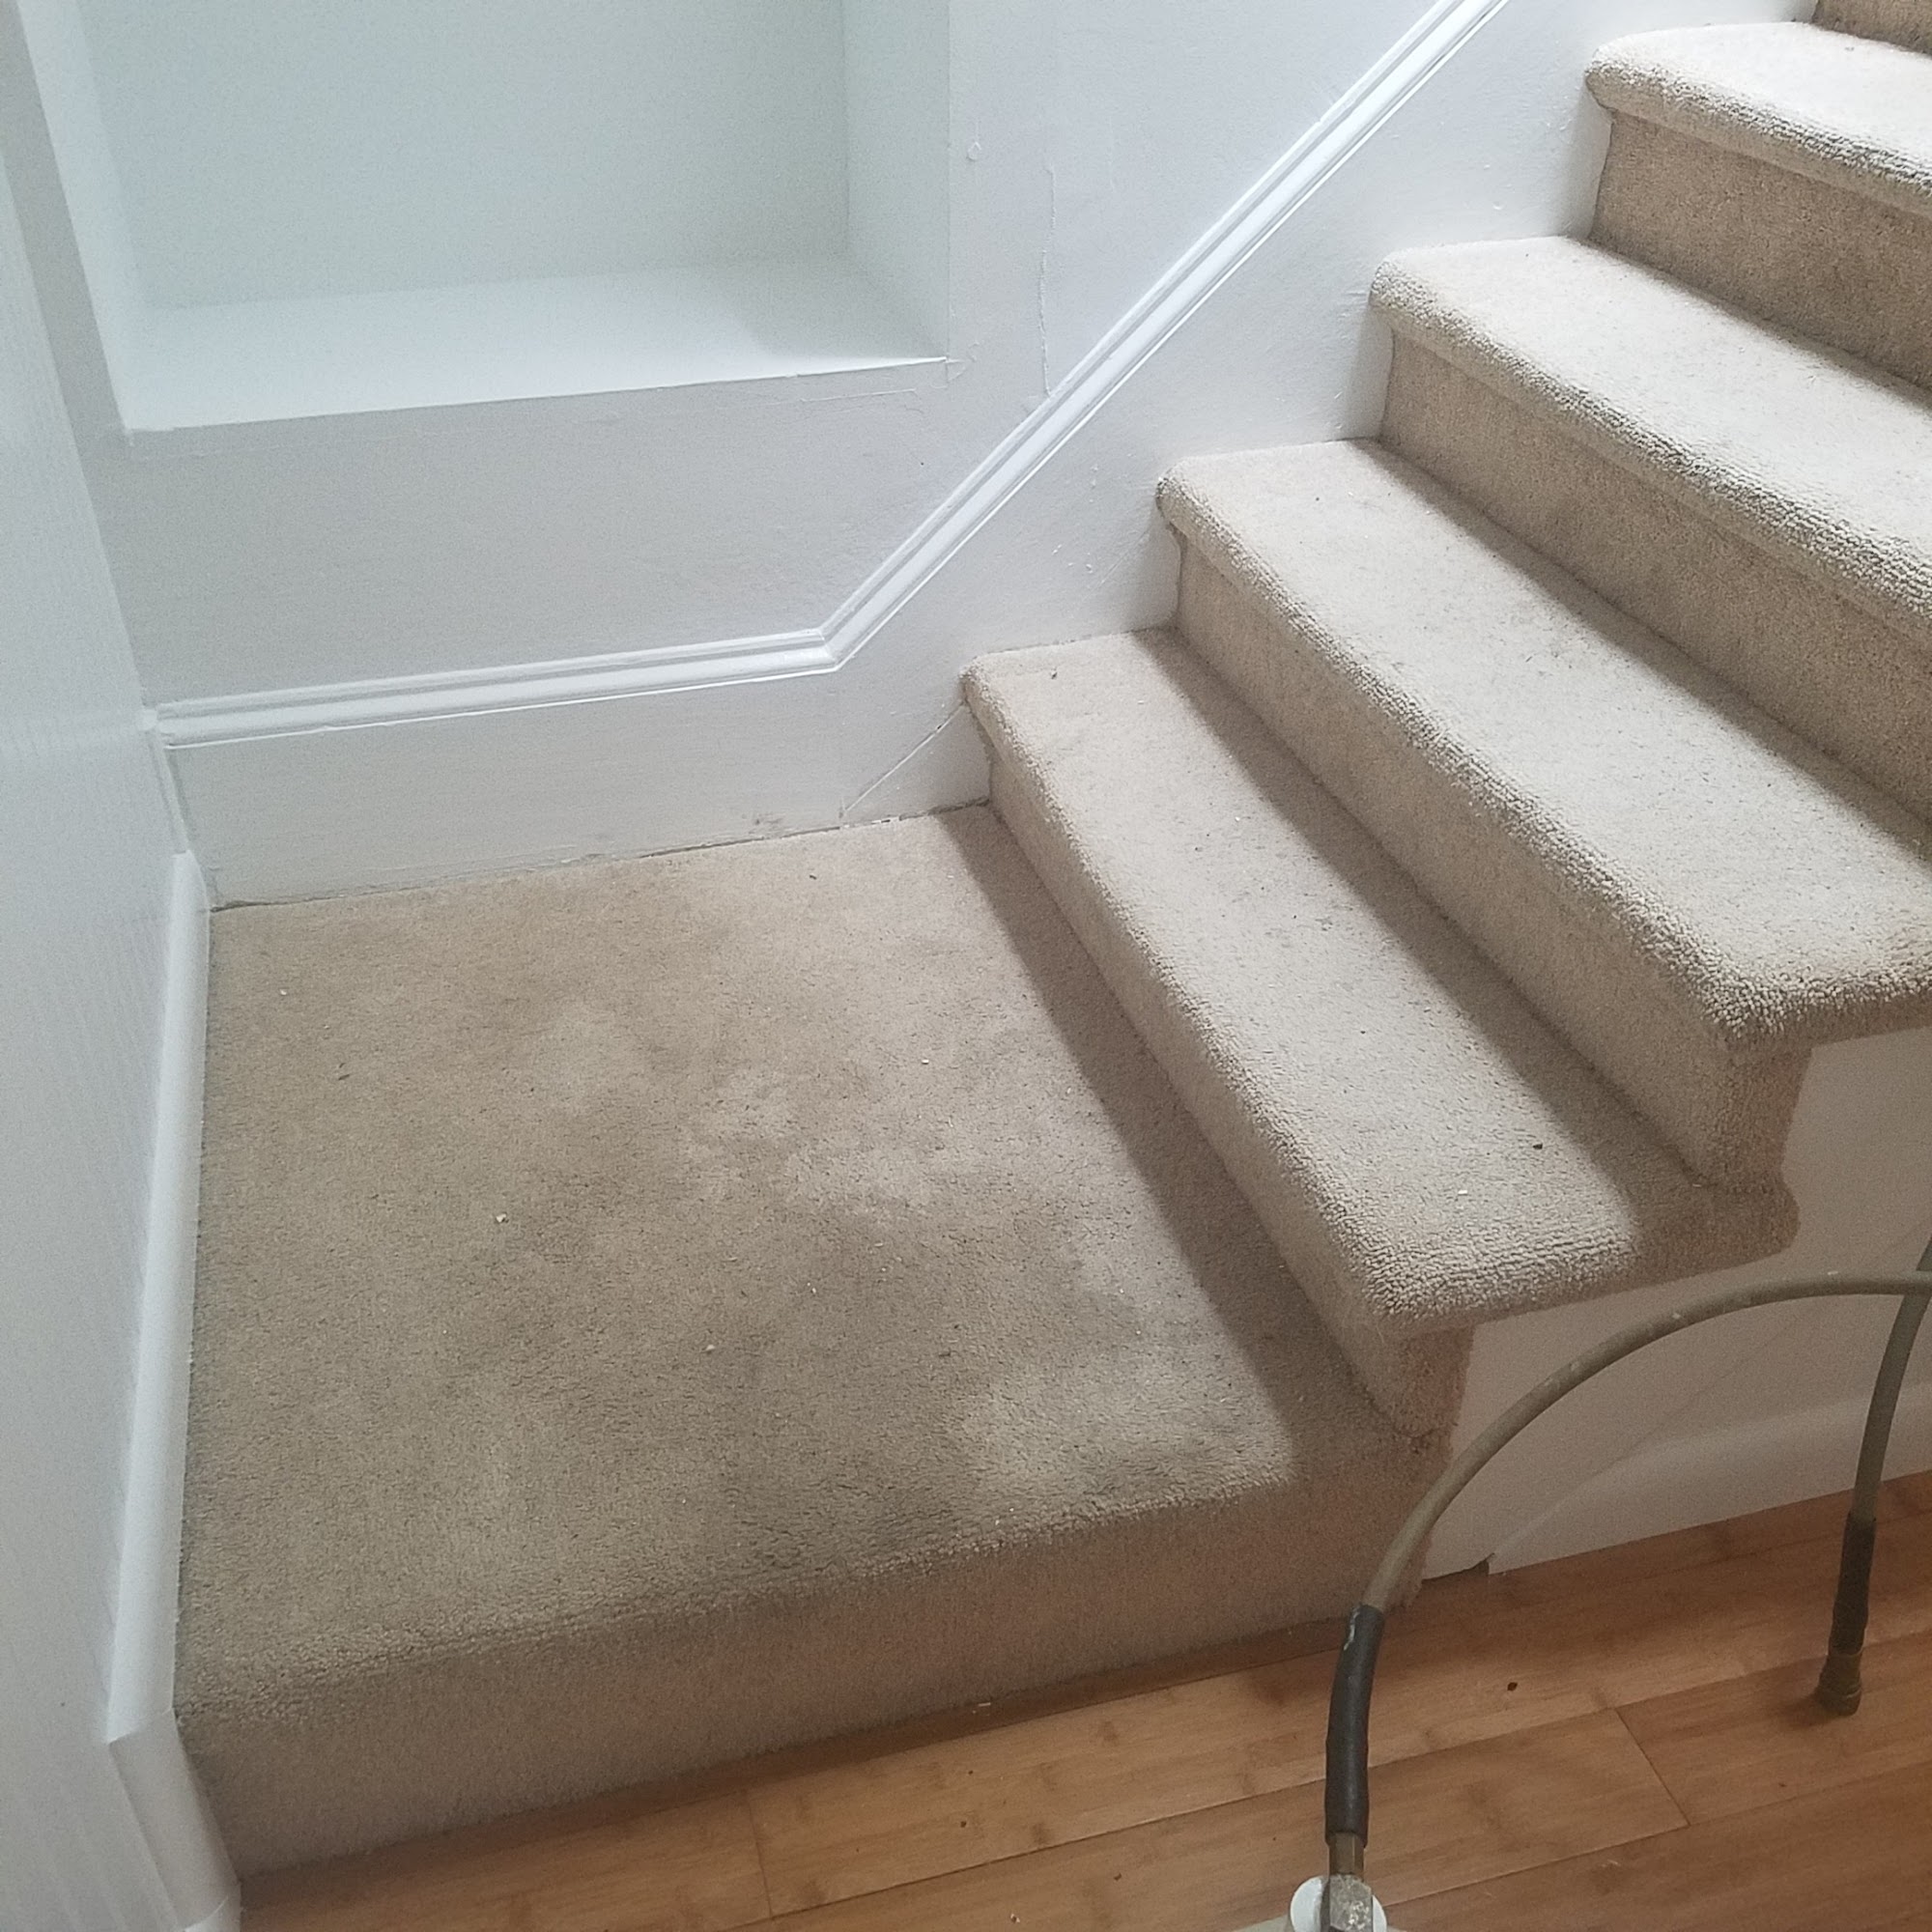 A Nu-Life Carpet Sales and Cleaning 204 Channel Dr, Point Pleasant Beach New Jersey 08742